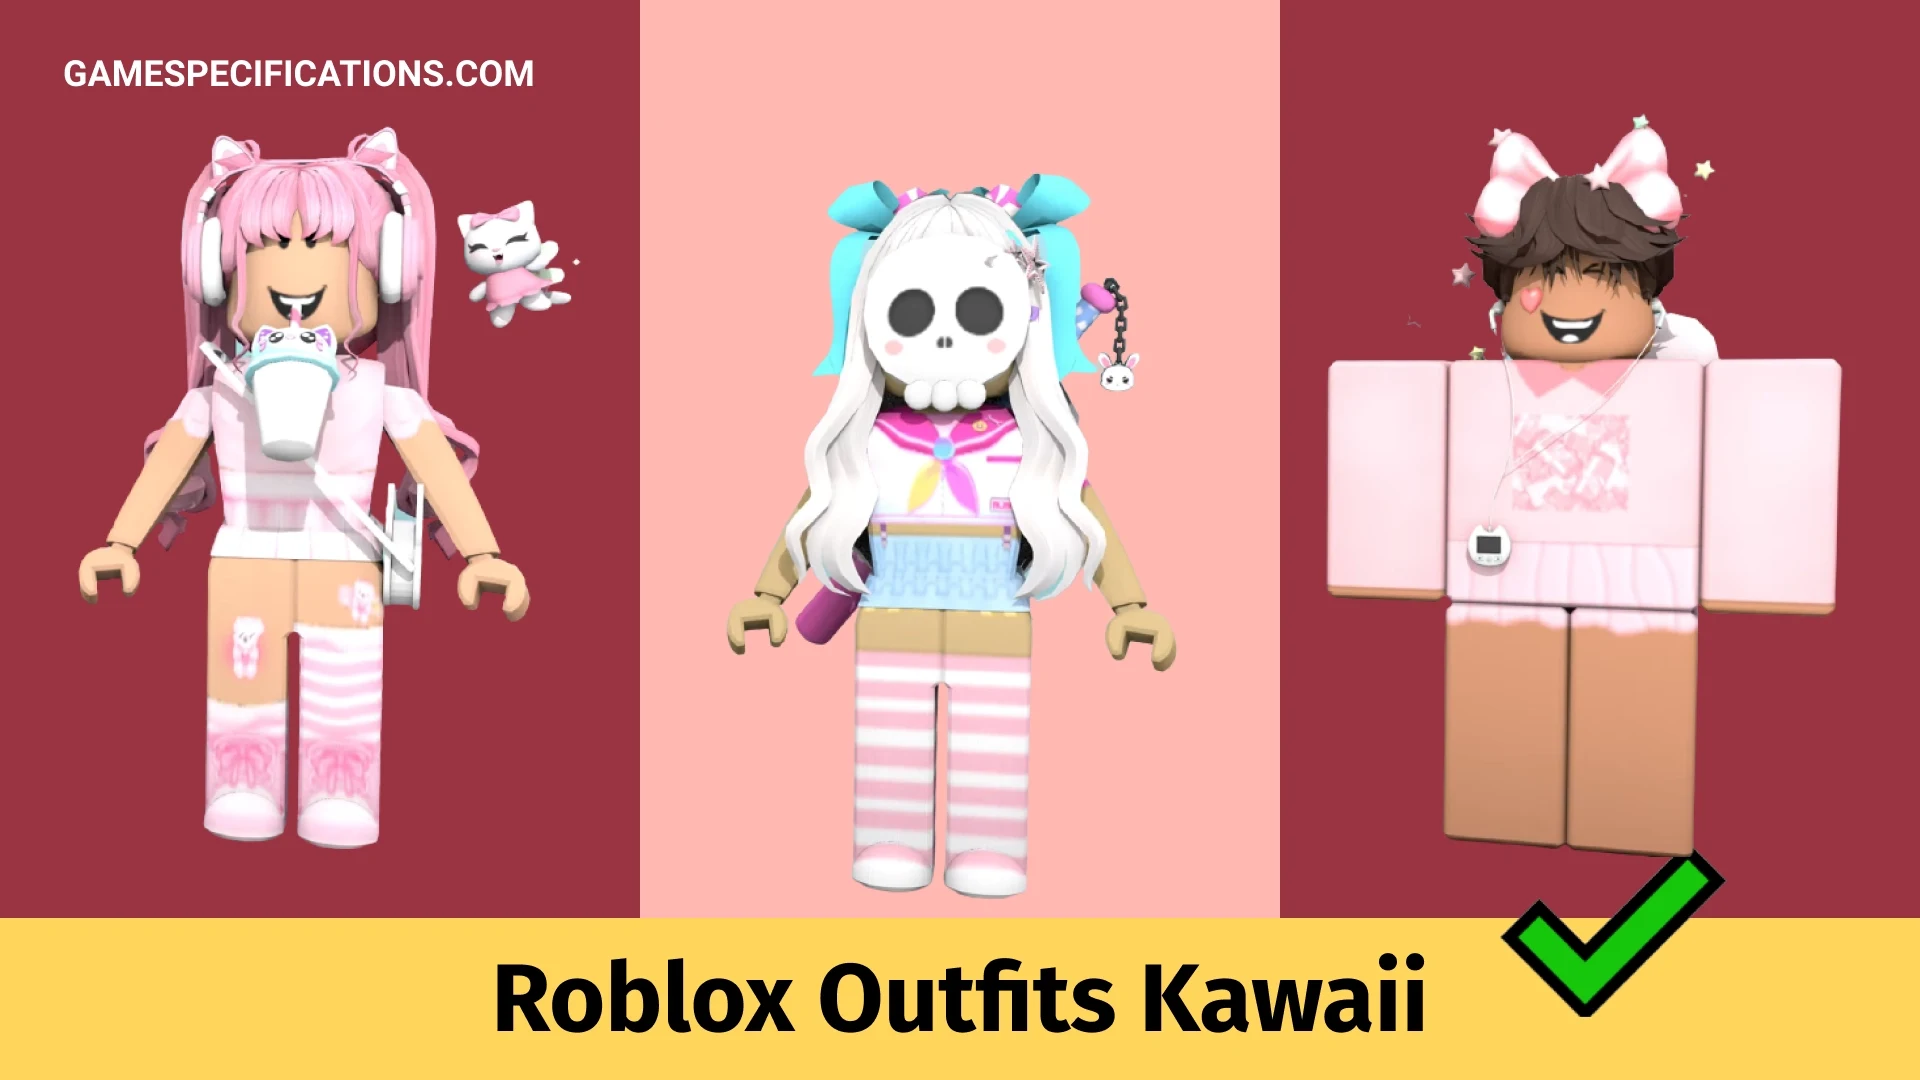 Roblox Outfits Kawaii To Look Cute - Game Specifications